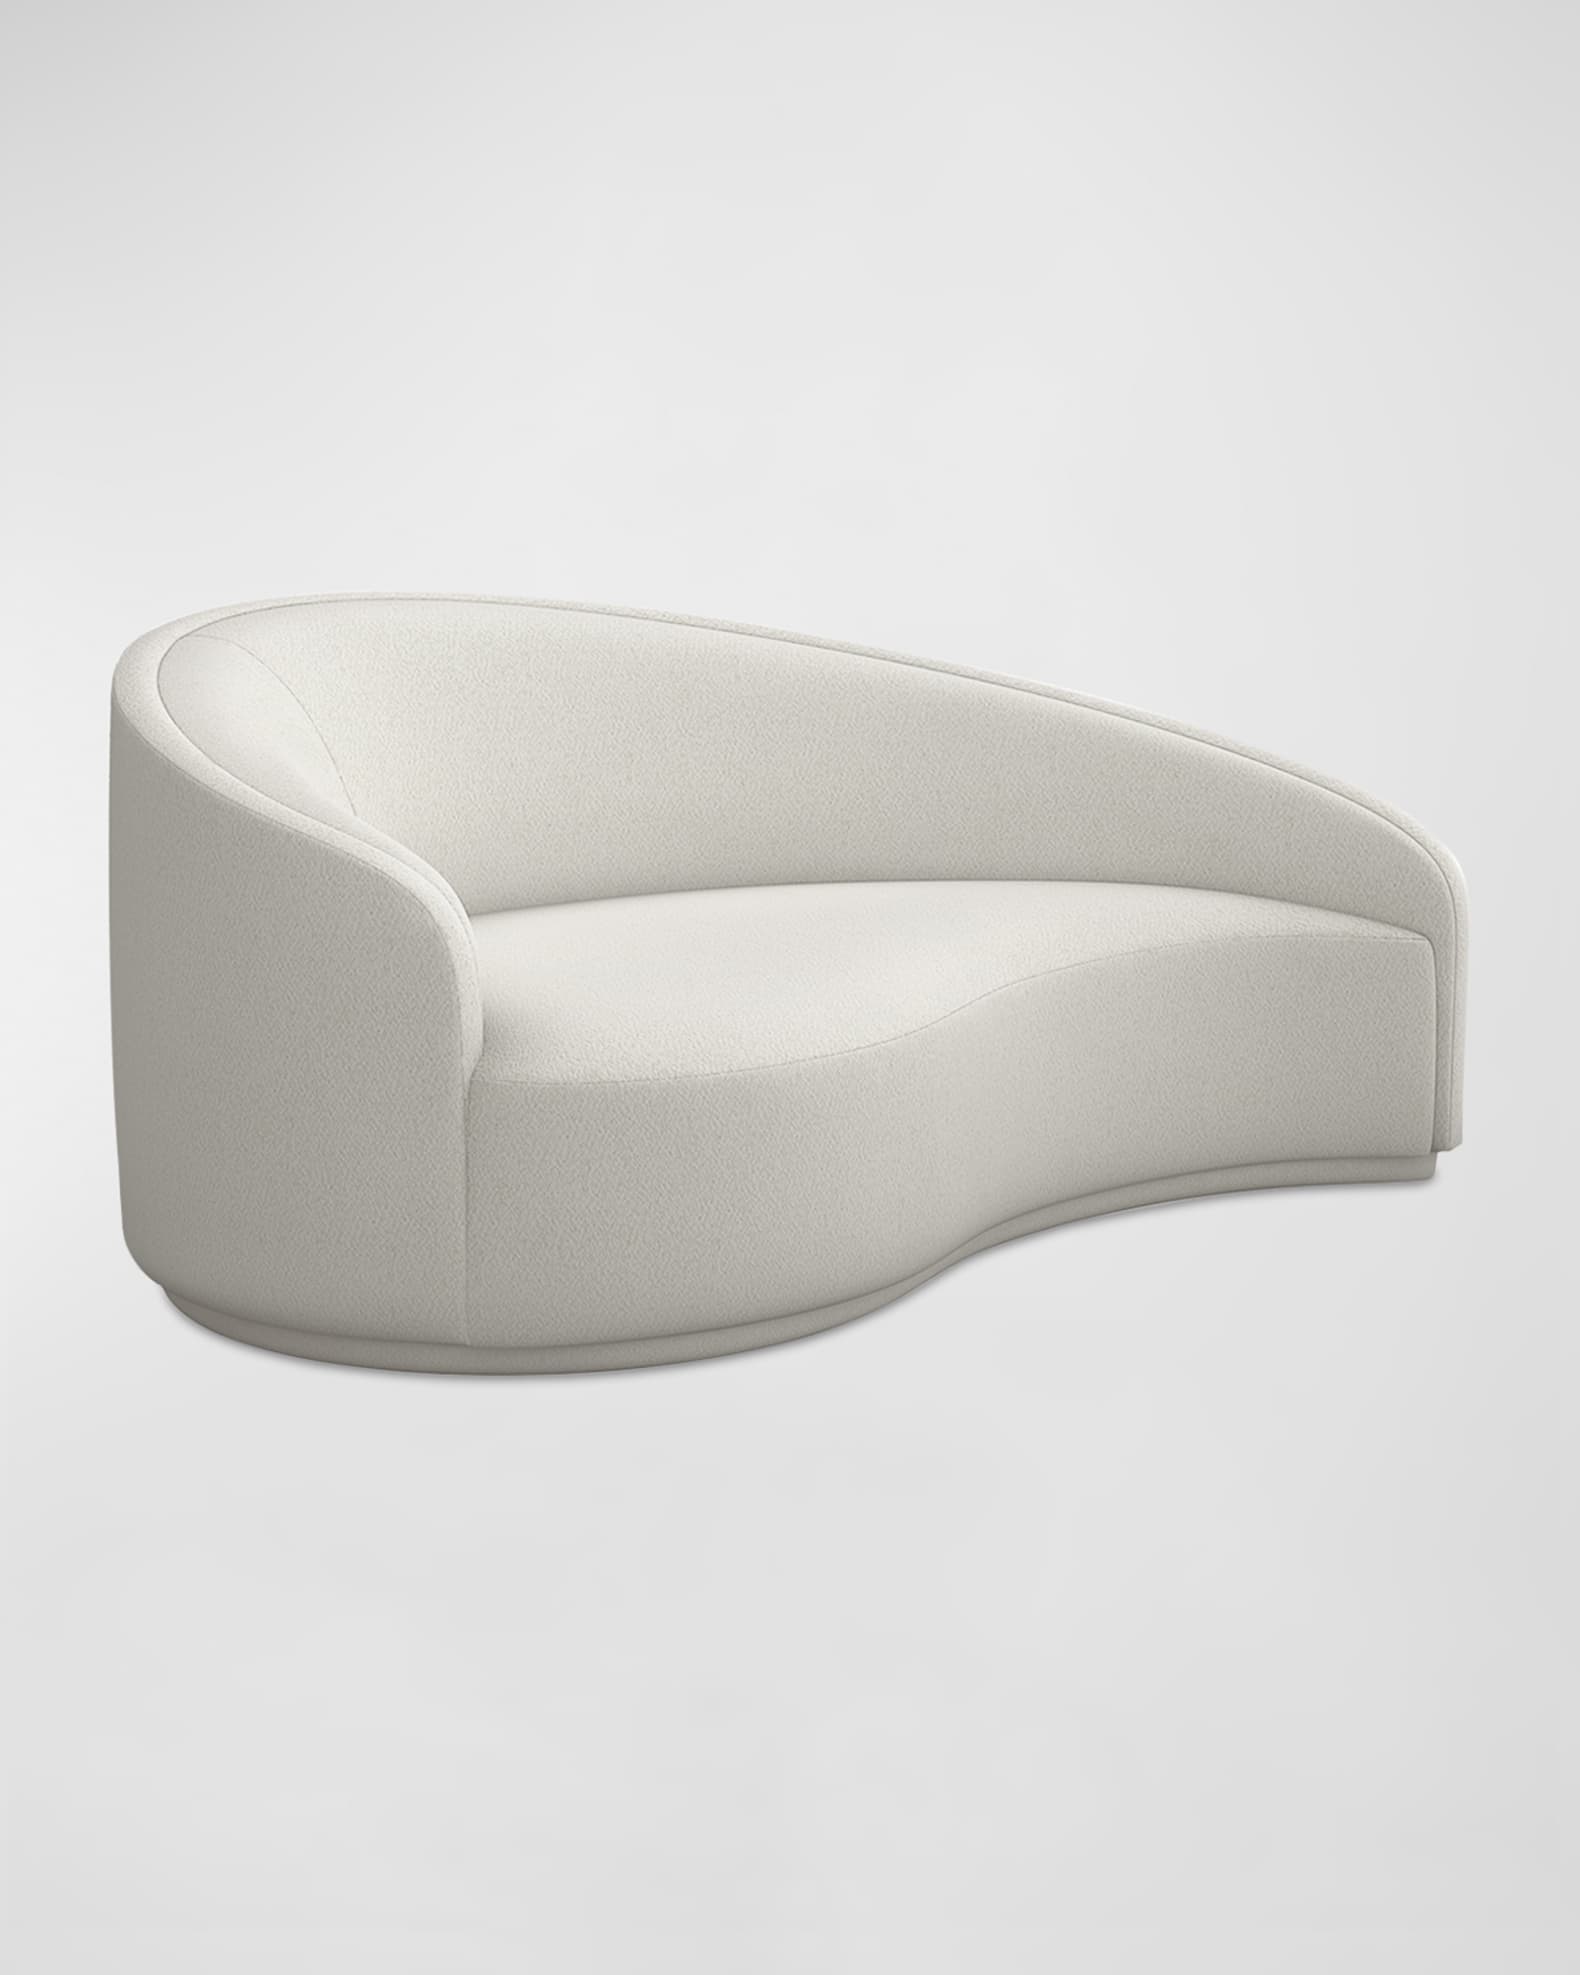 Interlude Home Dana Left Curved Chaise